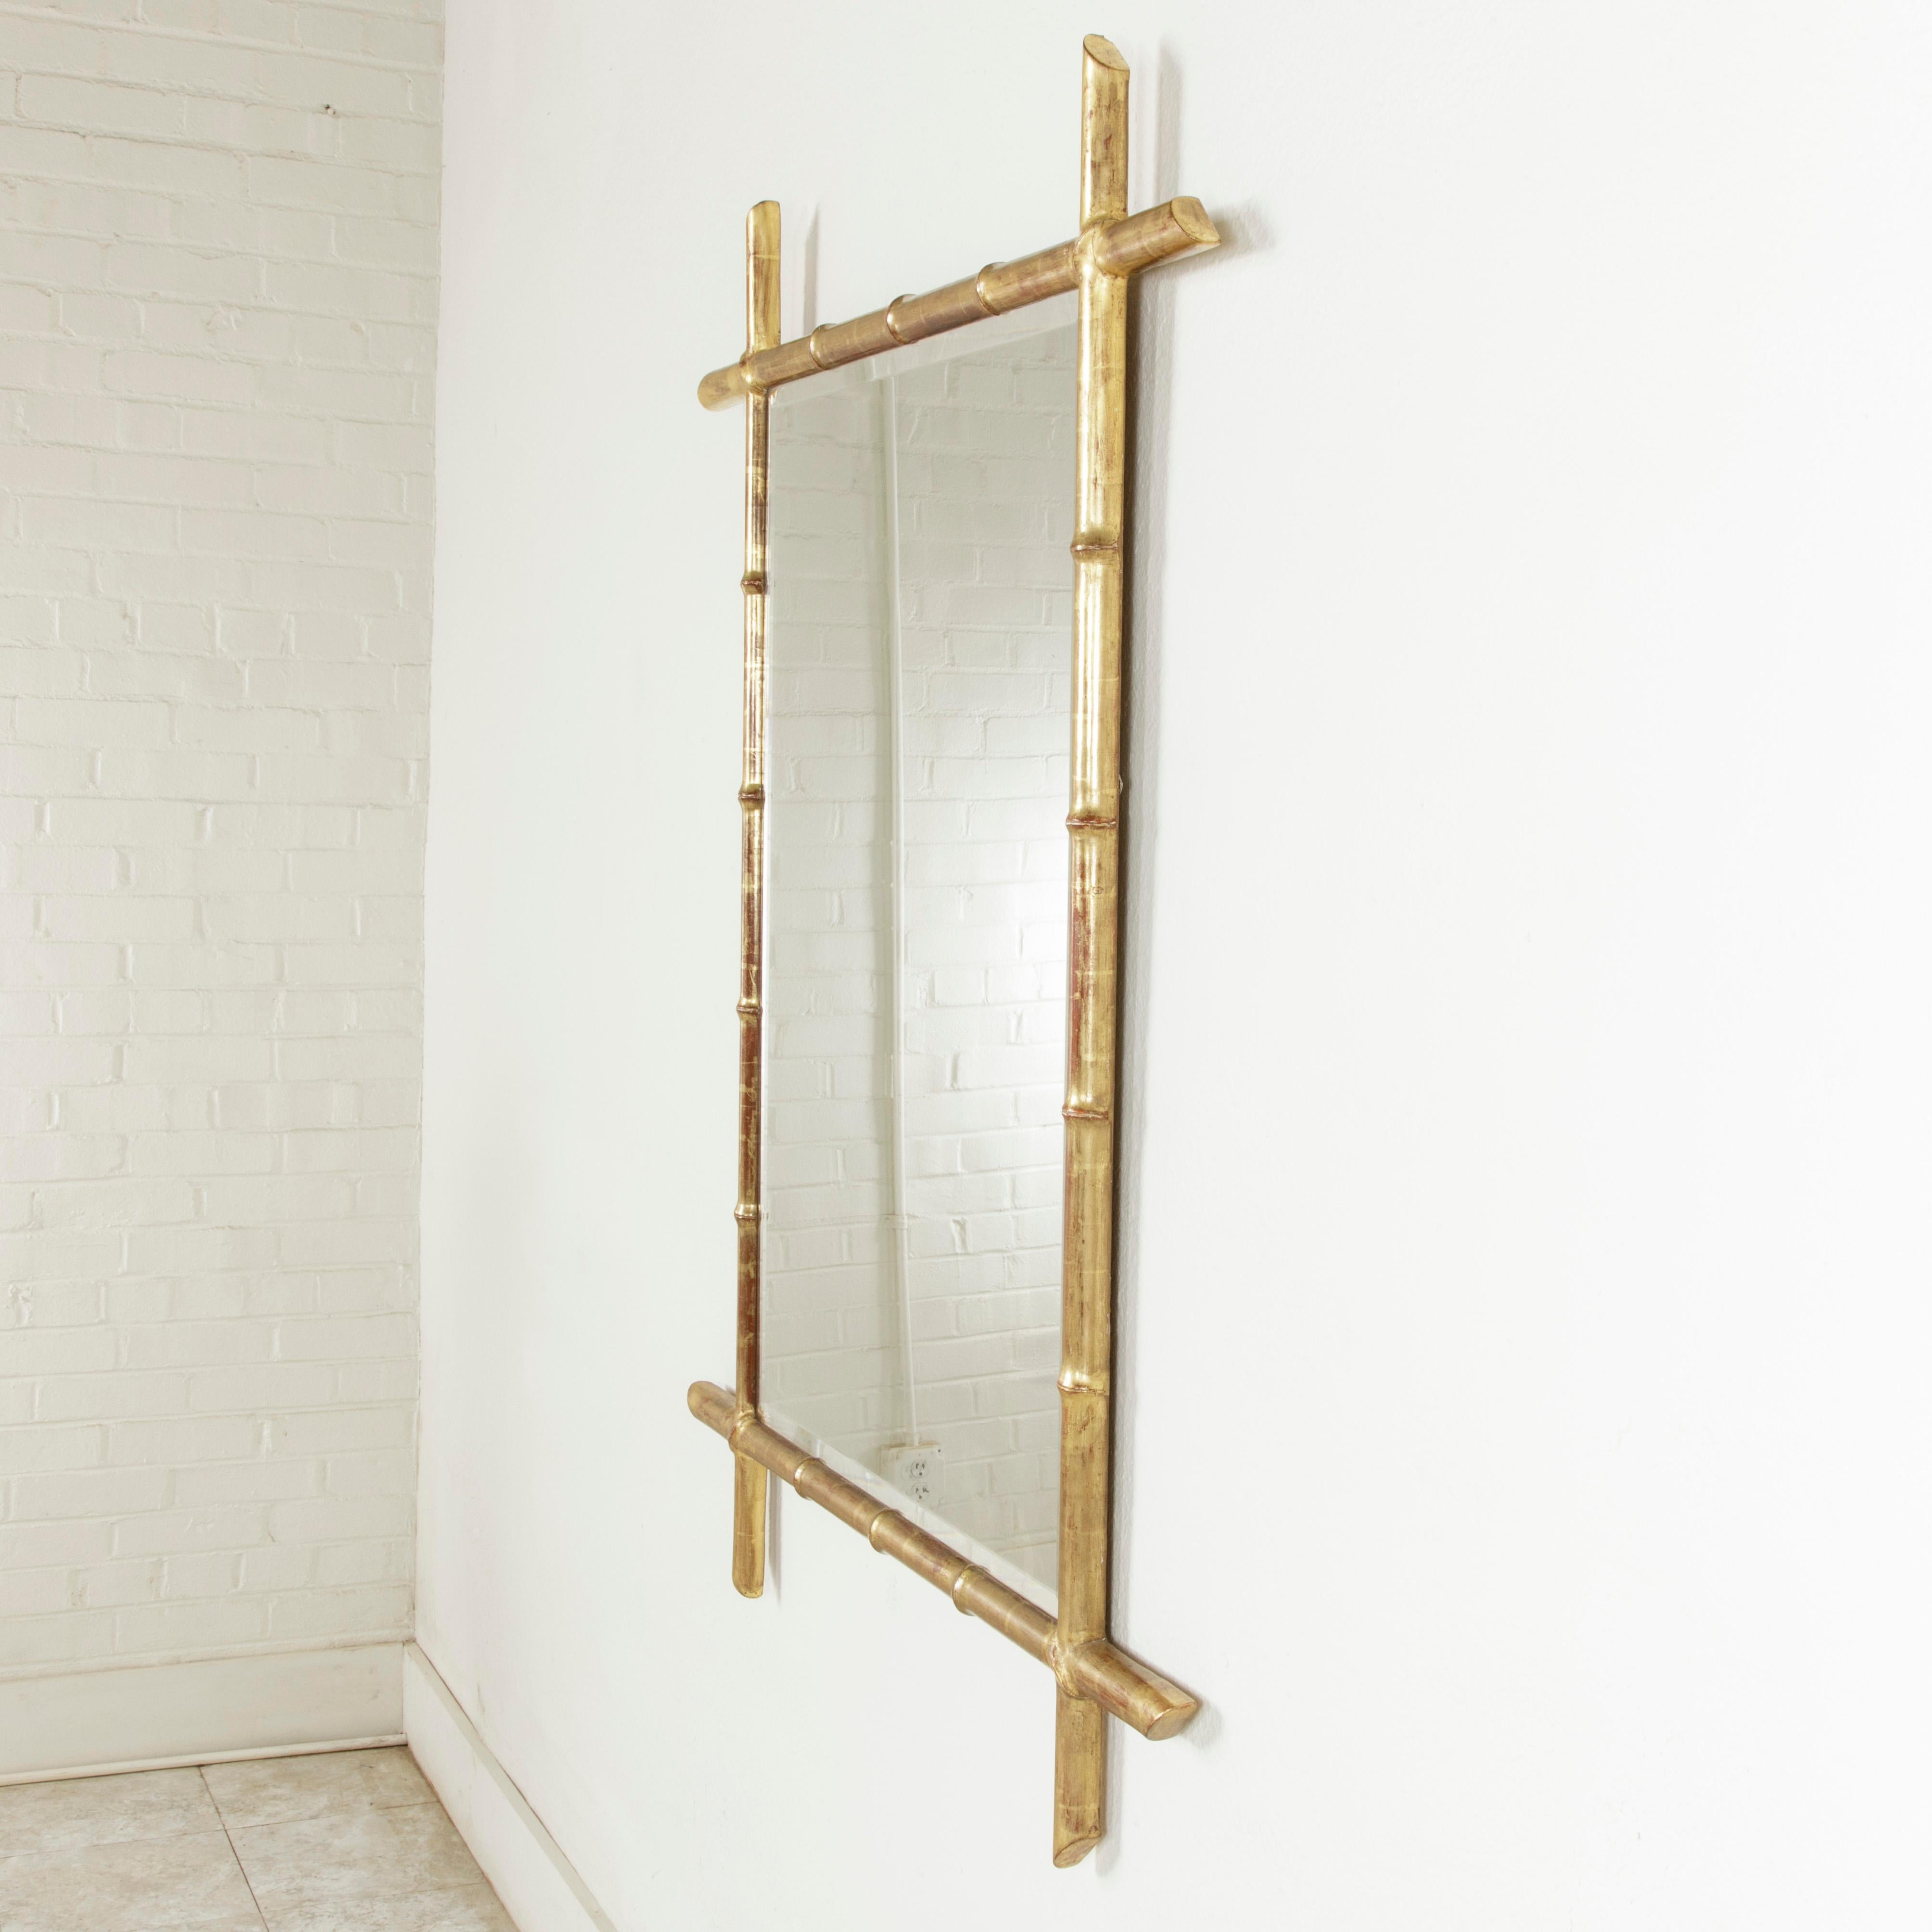 This late 19th century French giltwood mirror features a square faux bamboo frame that surrounds its beveled glass. The bamboo extensions of the frame are cut at the ends at 45 degree angles, giving the mirror a contemporary look. The frame measures